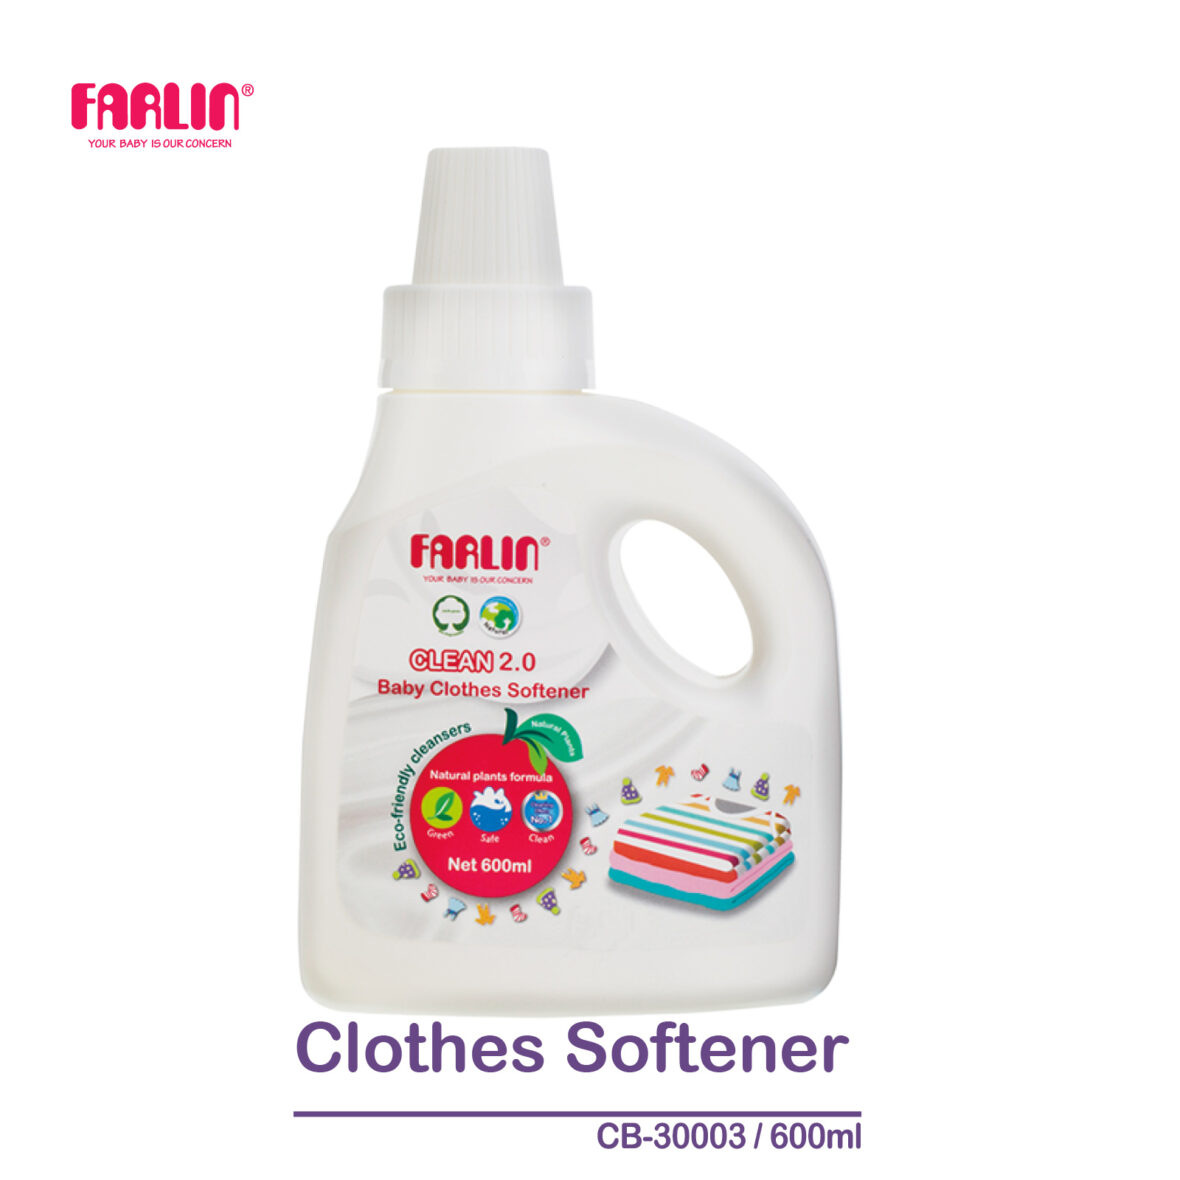 Farlin Clean 2.0 Baby Clothes Softener